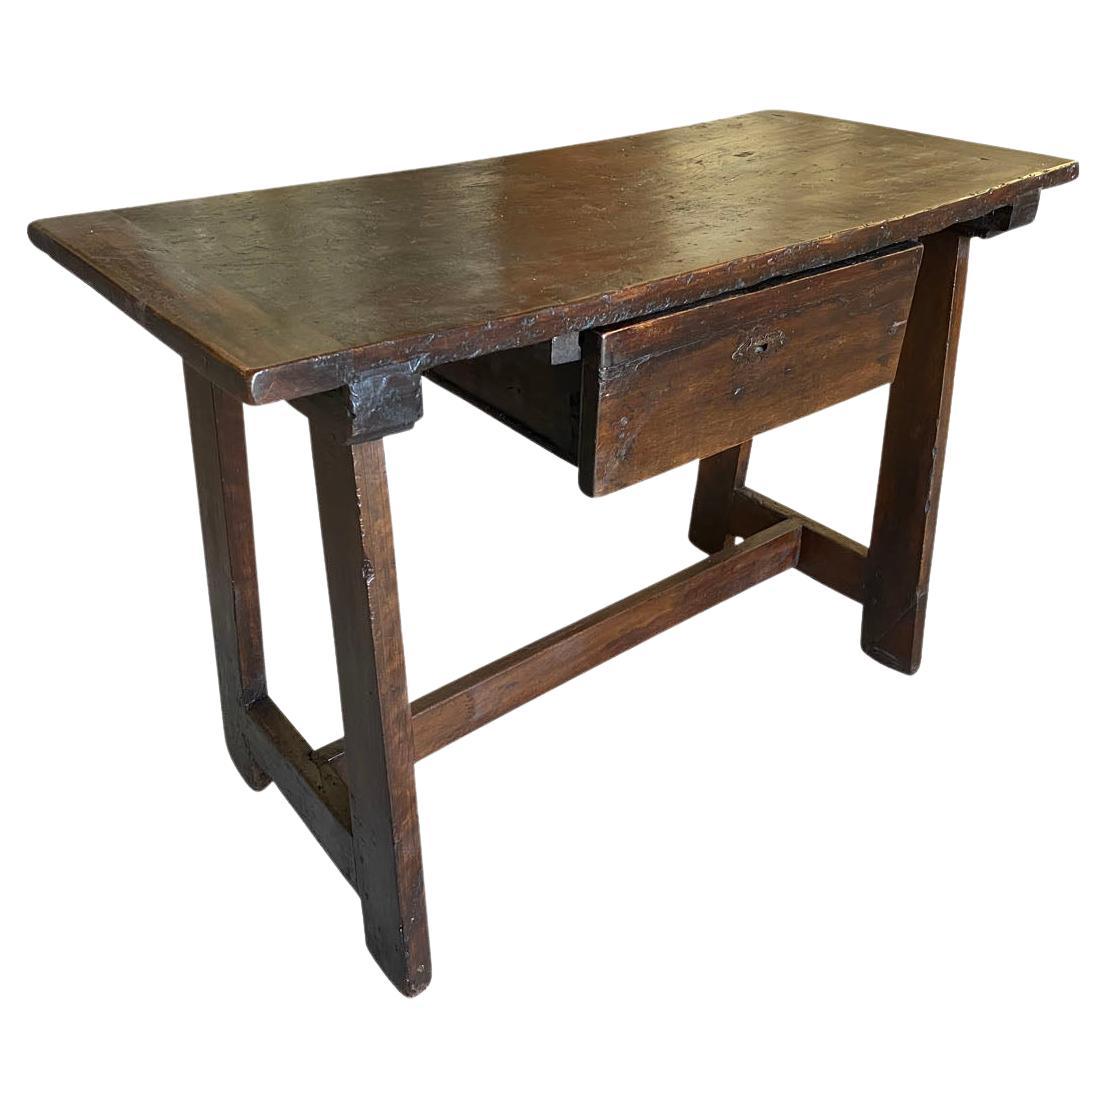 Table d'appoint italienne du XVIIe sicle, console